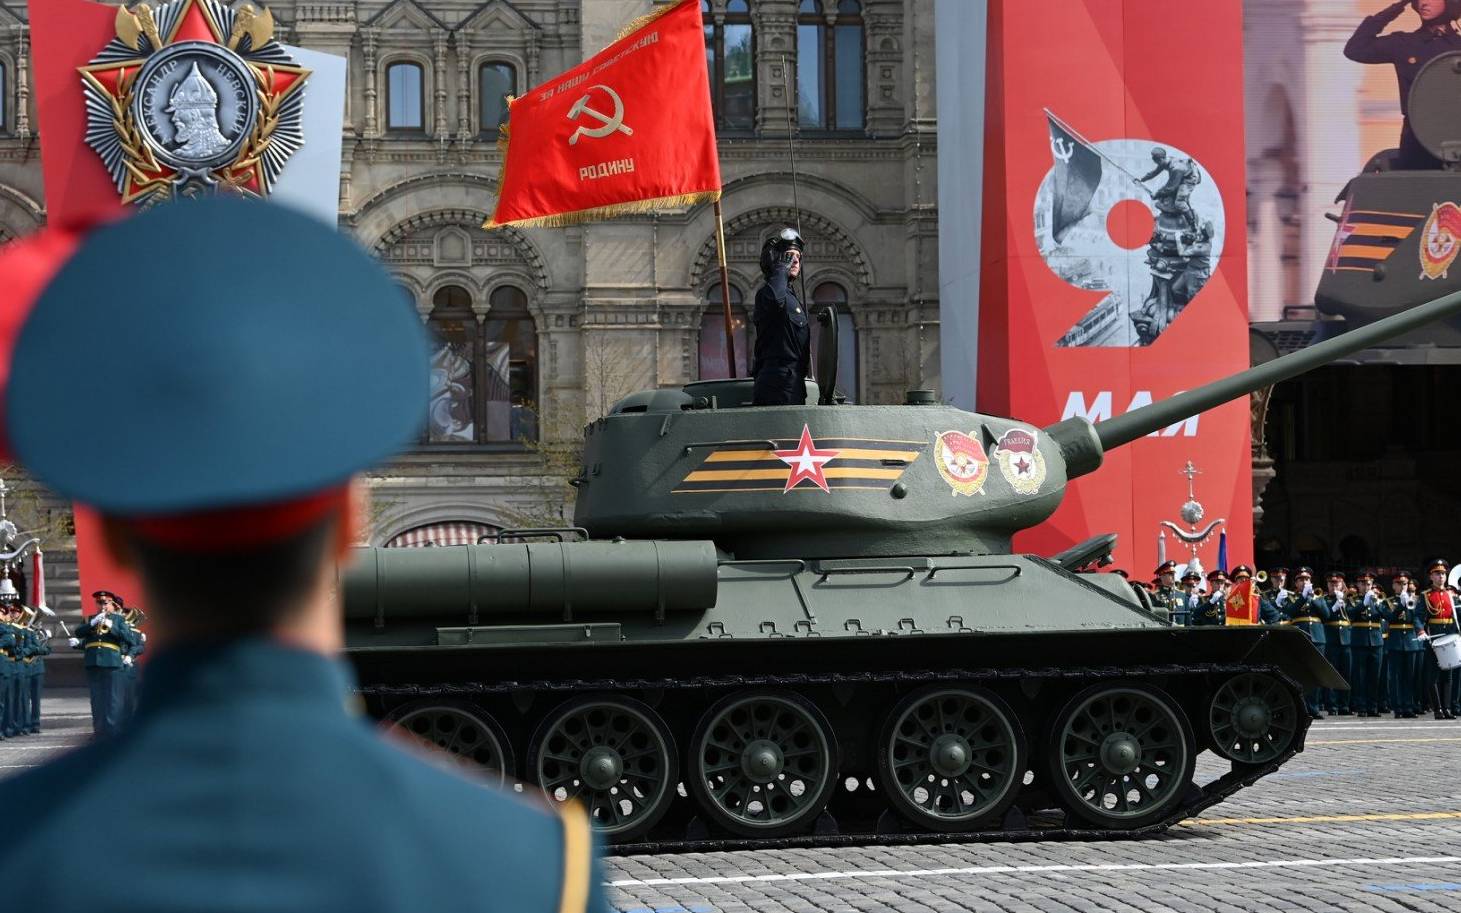 A Soviet era T-34 tank parades through Red Square during the general rehearsal of the Victory Day military parade in central Moscow on May 7, 2022. - Russia will celebrate the 77th anniversary of the 1945 victory over Nazi Germany on May 9. (Photo by Kirill KUDRYAVTSEV / AFP)